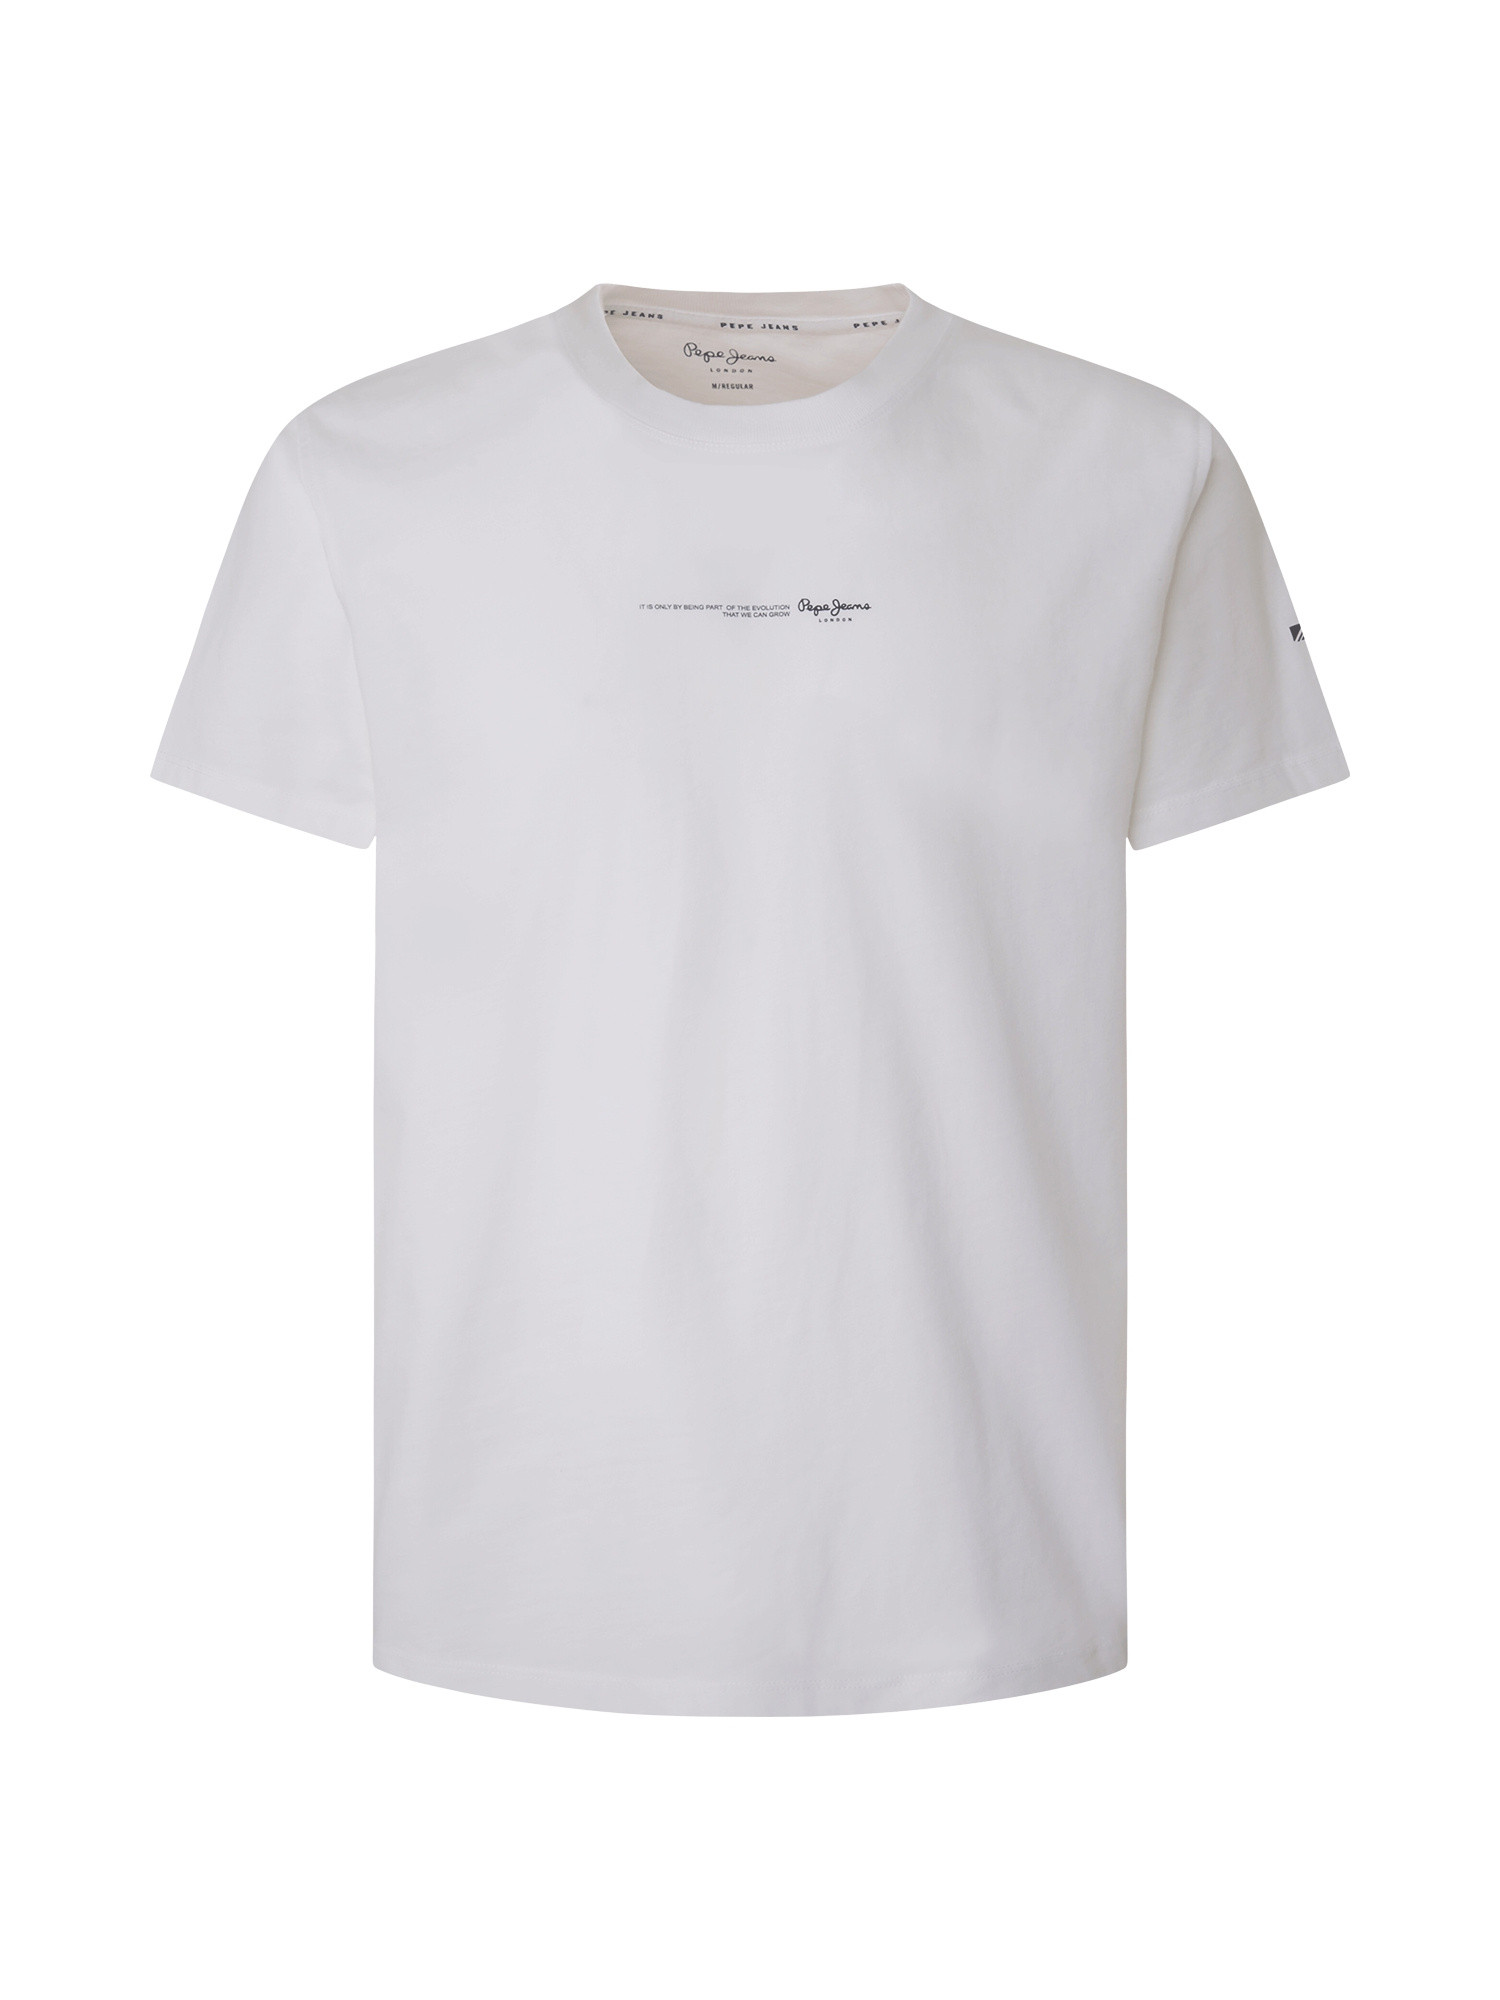 Pepe Jeans - T-shirt con scritta in cotone, Bianco, large image number 0